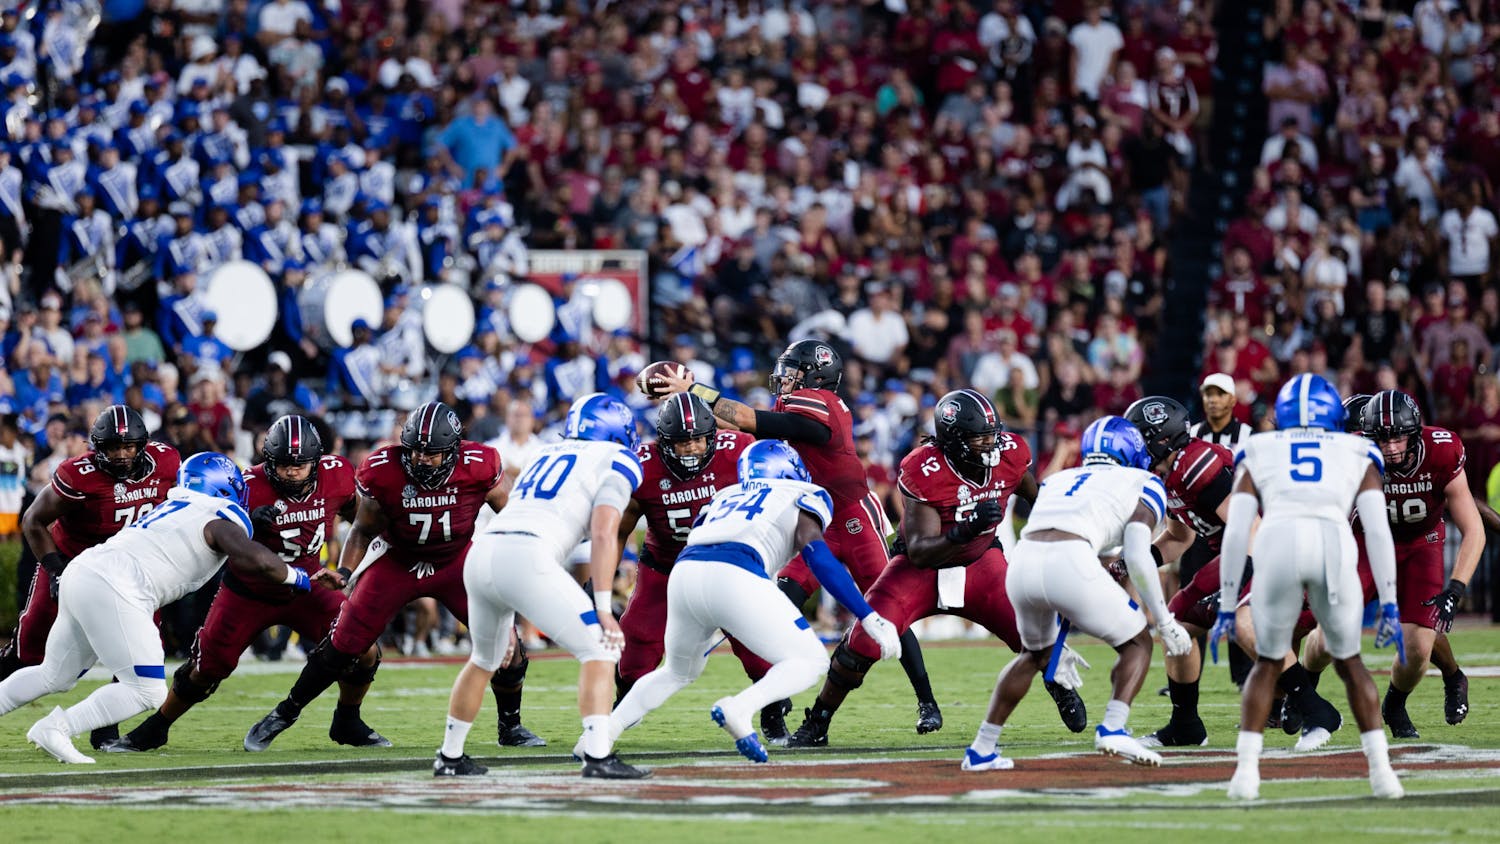 FILE — Junior quarterback Spencer Rattler passes off the ball during the South Carolina and Georgia State game in Columbia, S.C., on Sept. 3, 2022. The Gamecocks won 35-14 against the Panthers.